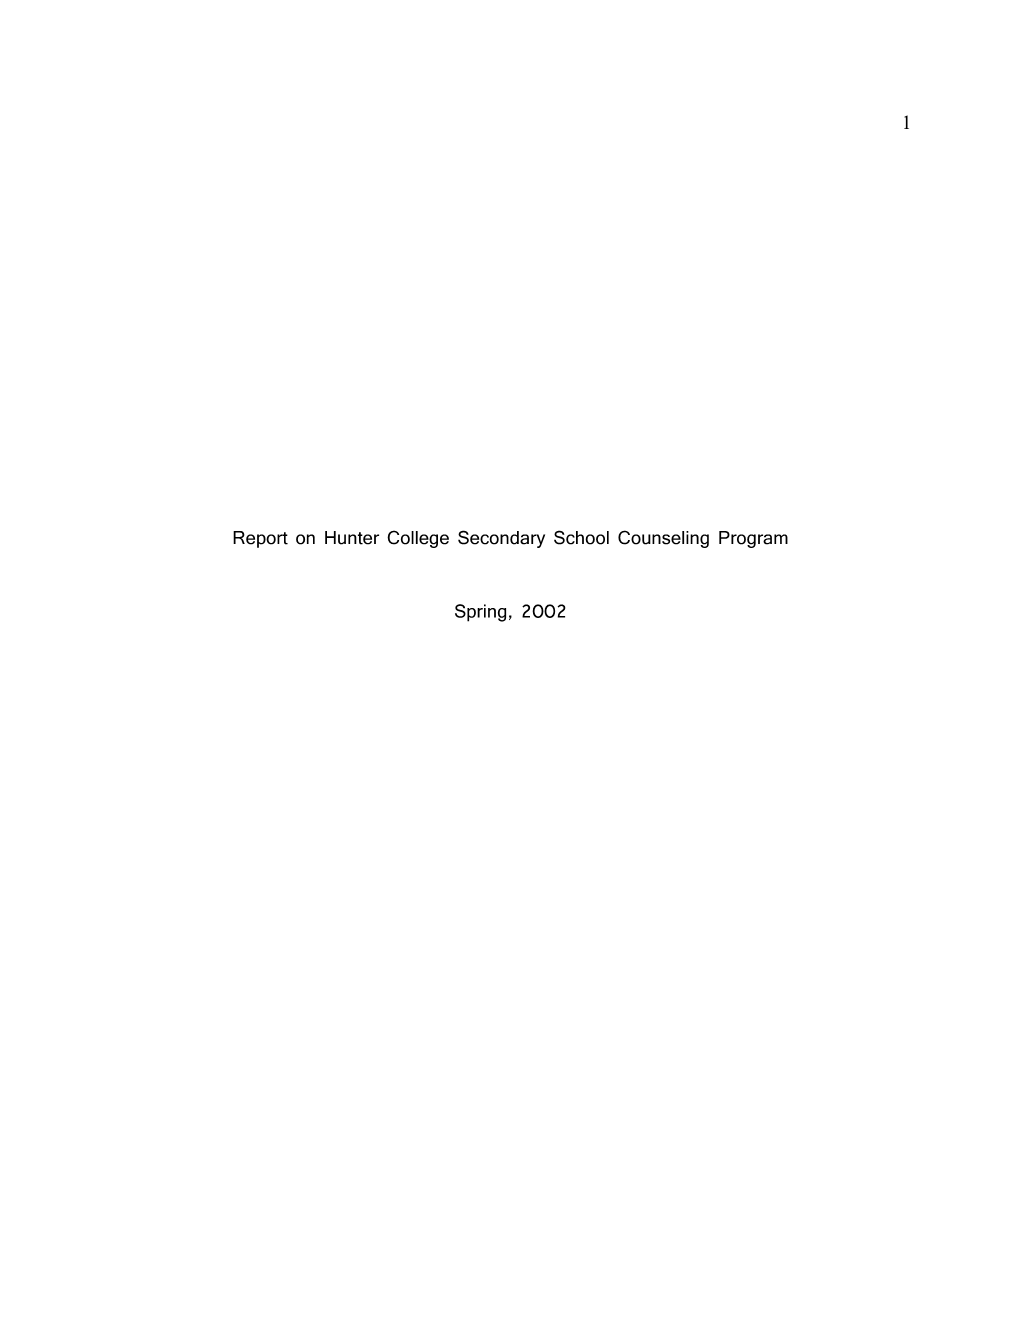 Report on Hunter College Secondary School Counseling Program